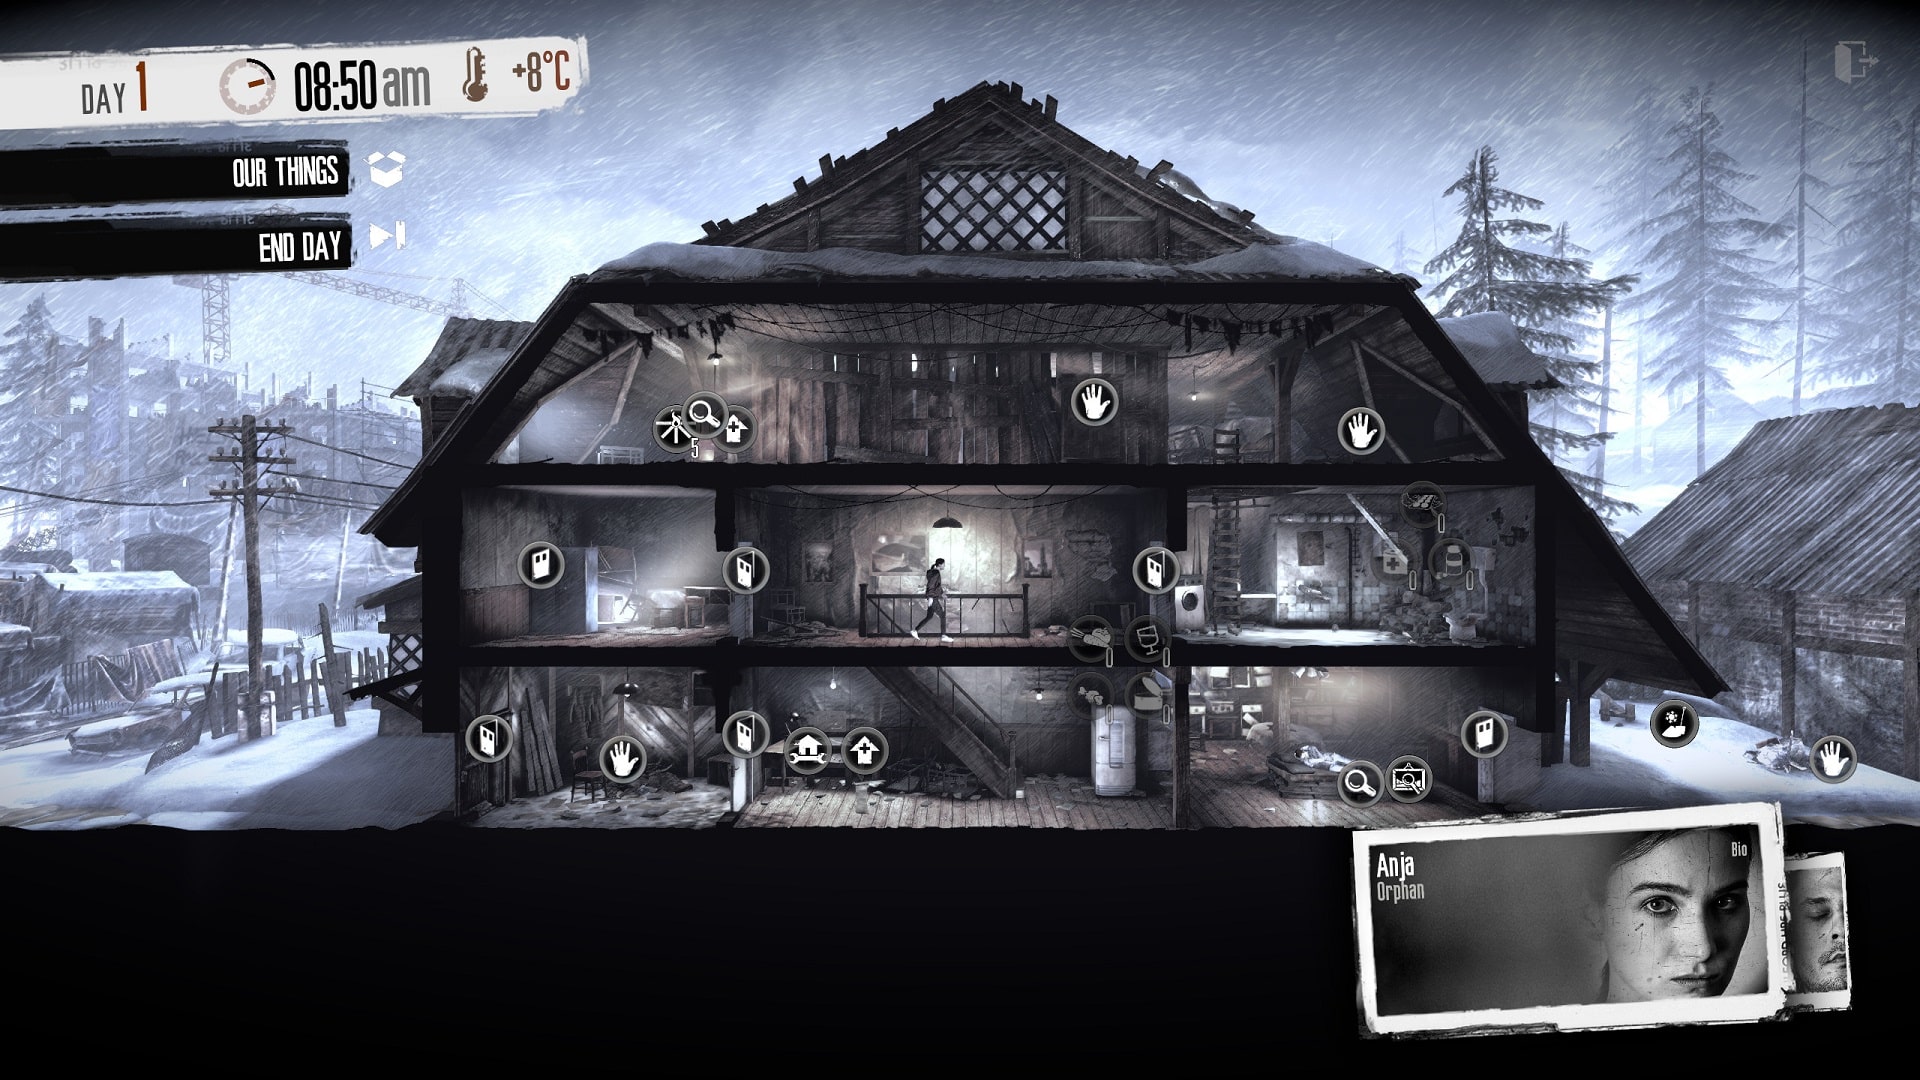 This War Of Mine, a game created by Polish developer 11 bit studios